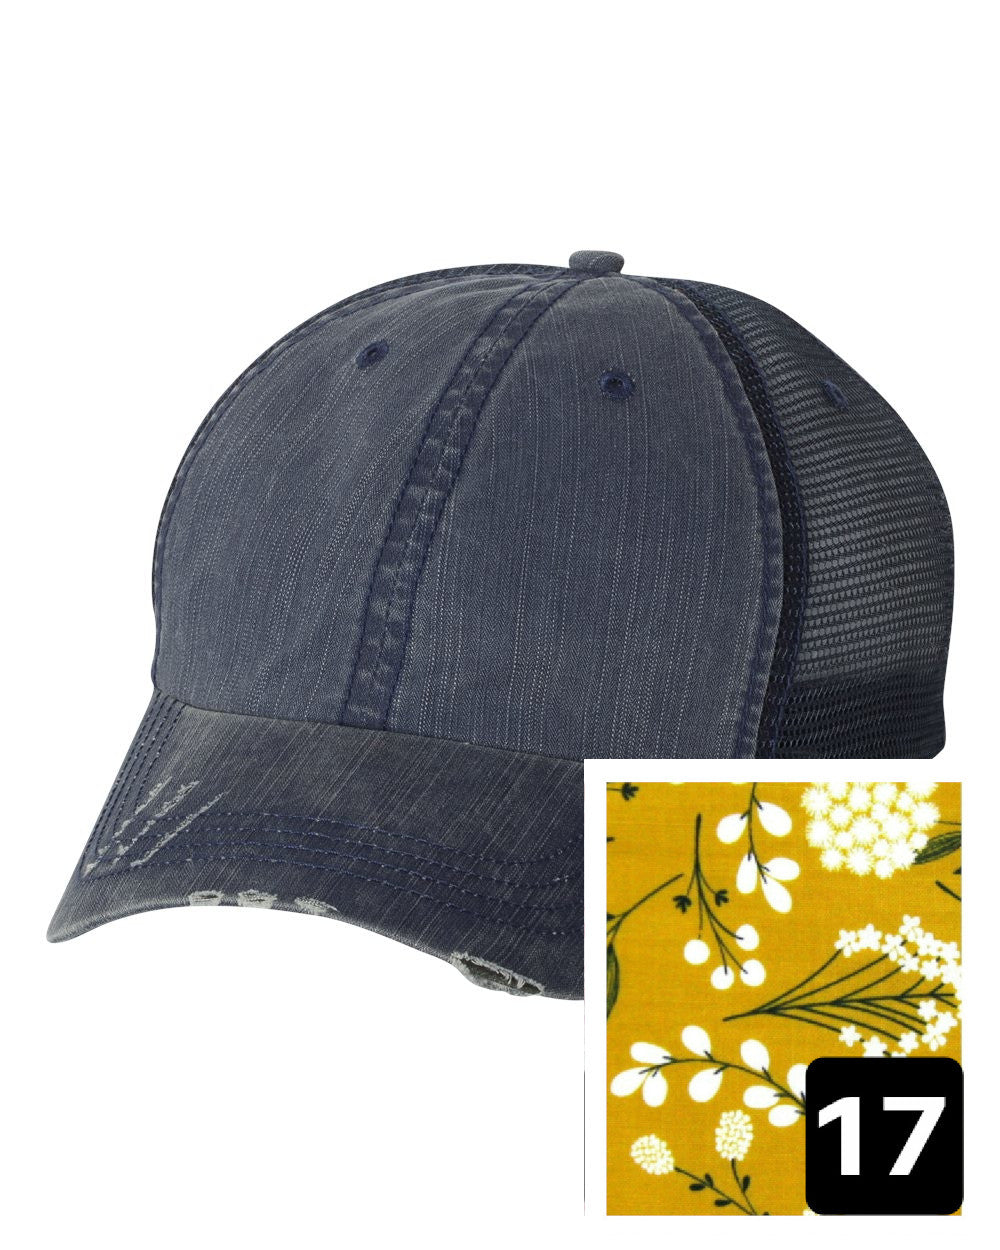 Colorado Hat | Navy Distressed Trucker Cap | Many Fabric Choices